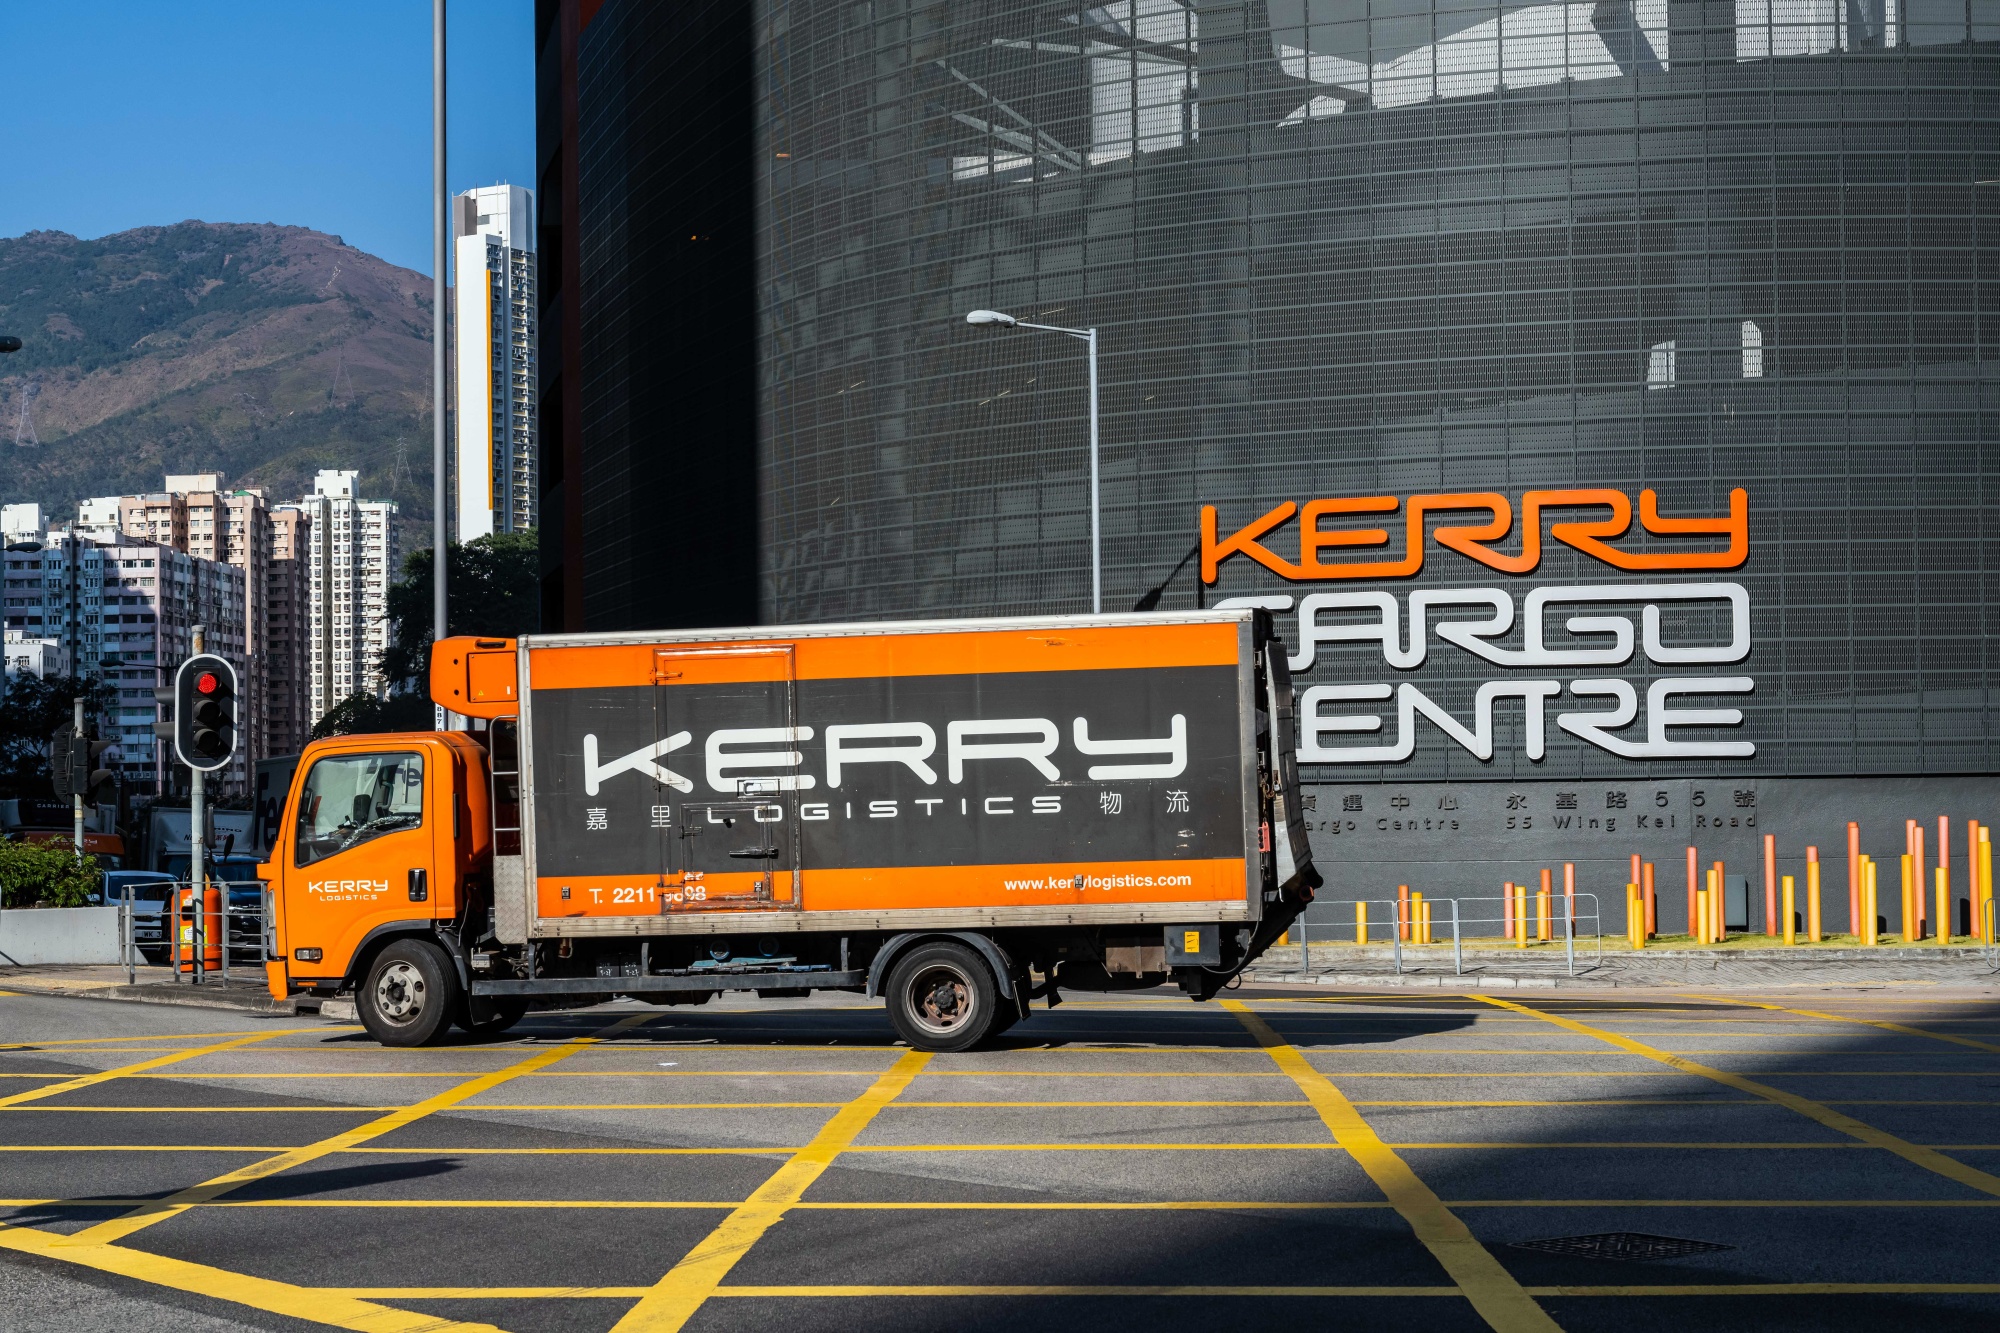 SF Holding to Take Over Kerry Logistics for $2.3 Billion - Bloomberg